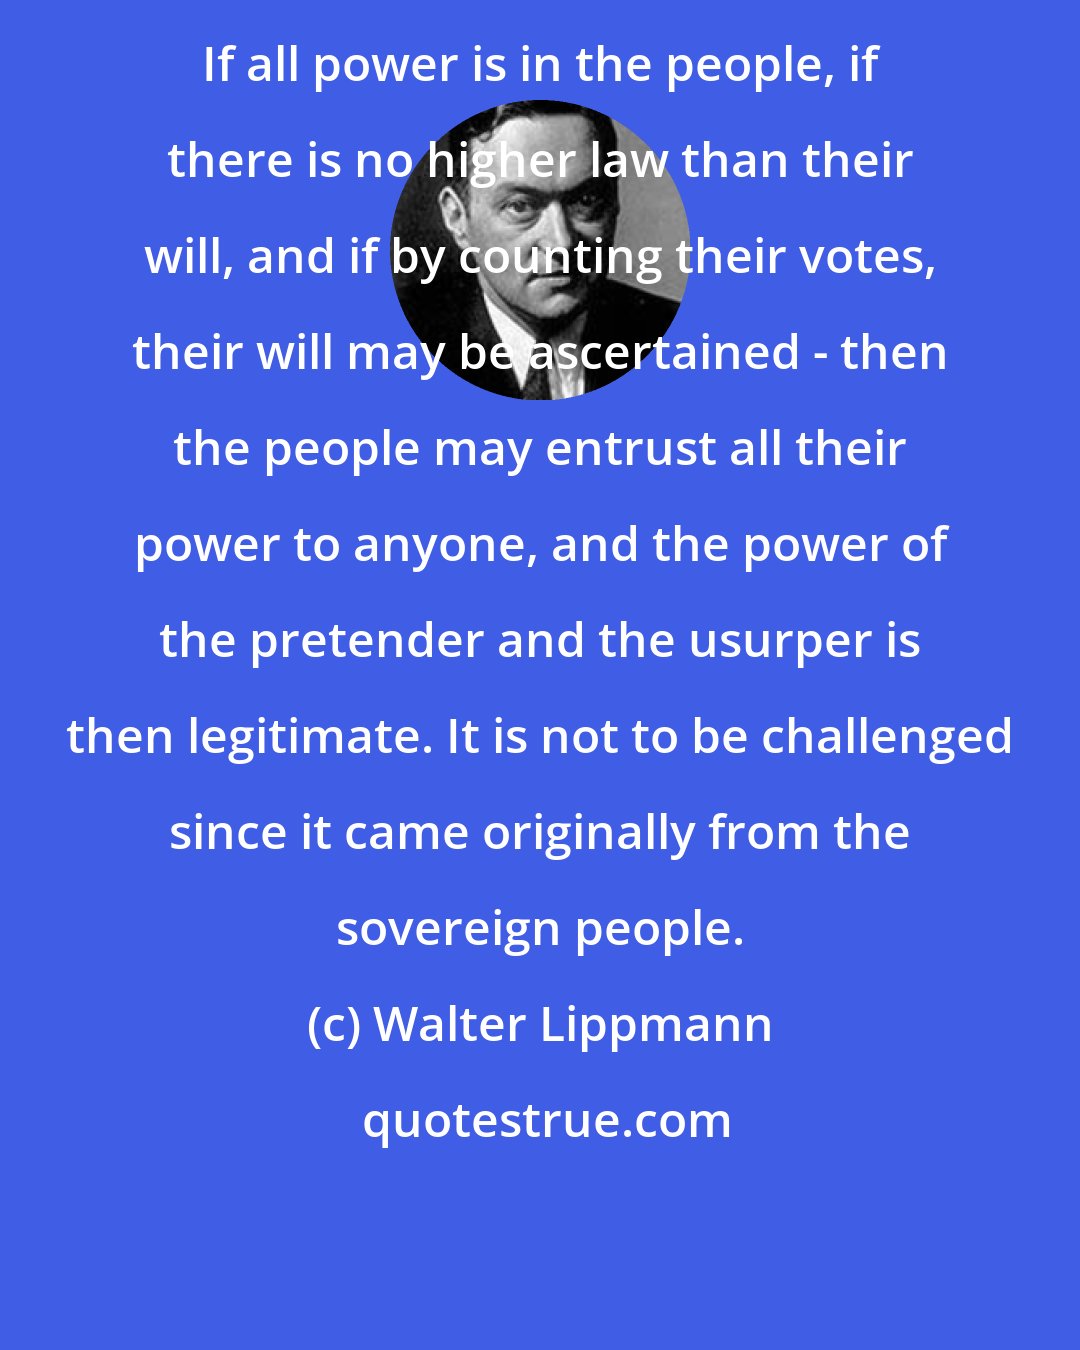 Walter Lippmann: If all power is in the people, if there is no higher law than their will, and if by counting their votes, their will may be ascertained - then the people may entrust all their power to anyone, and the power of the pretender and the usurper is then legitimate. It is not to be challenged since it came originally from the sovereign people.